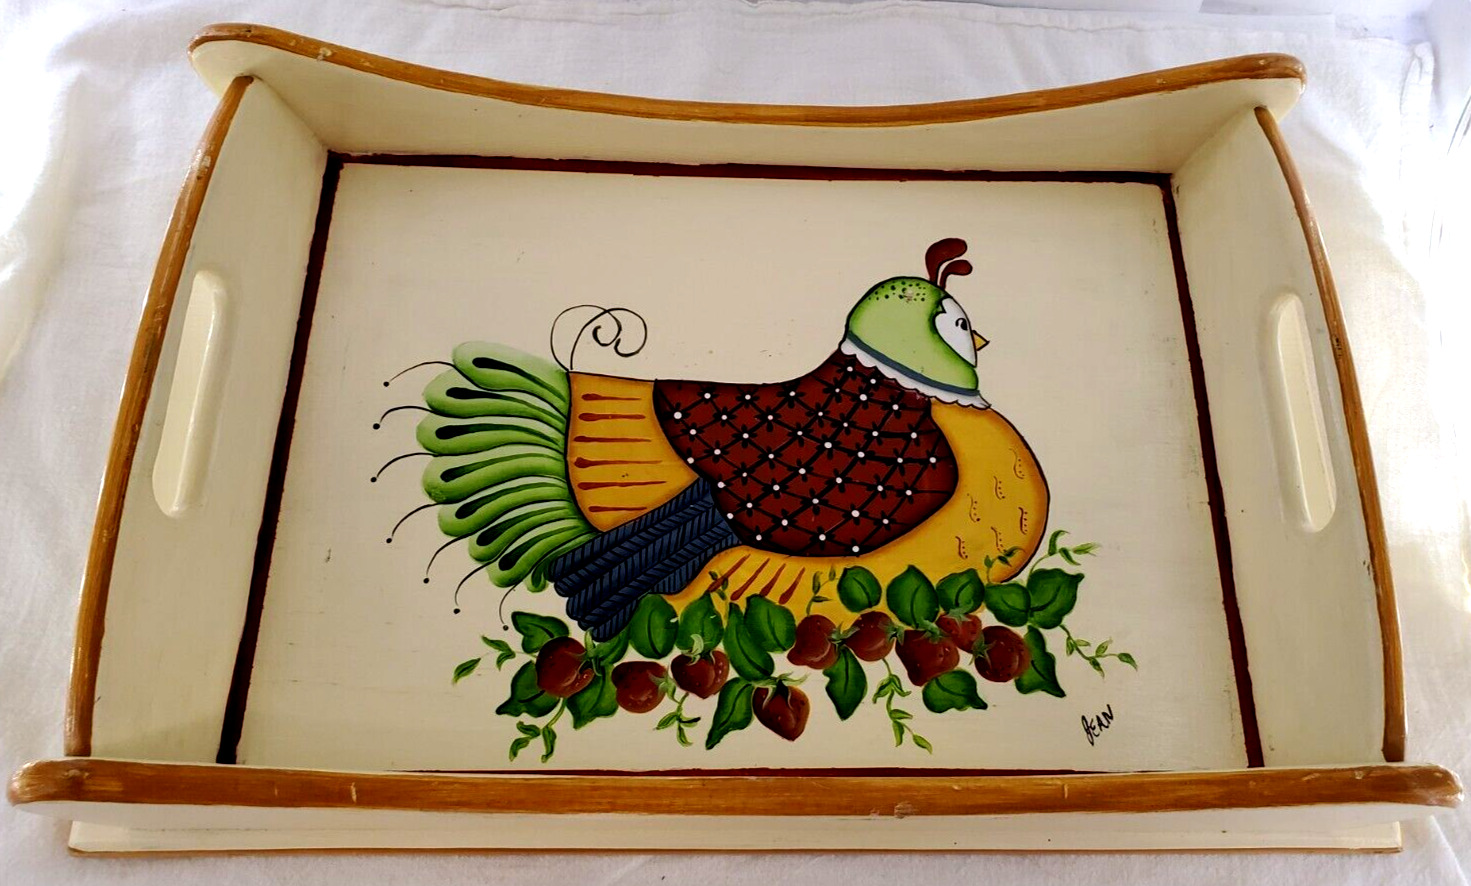 Vintage Tole Painted Wooden Serving Tray Chicken Country Kitchen Signed Jean